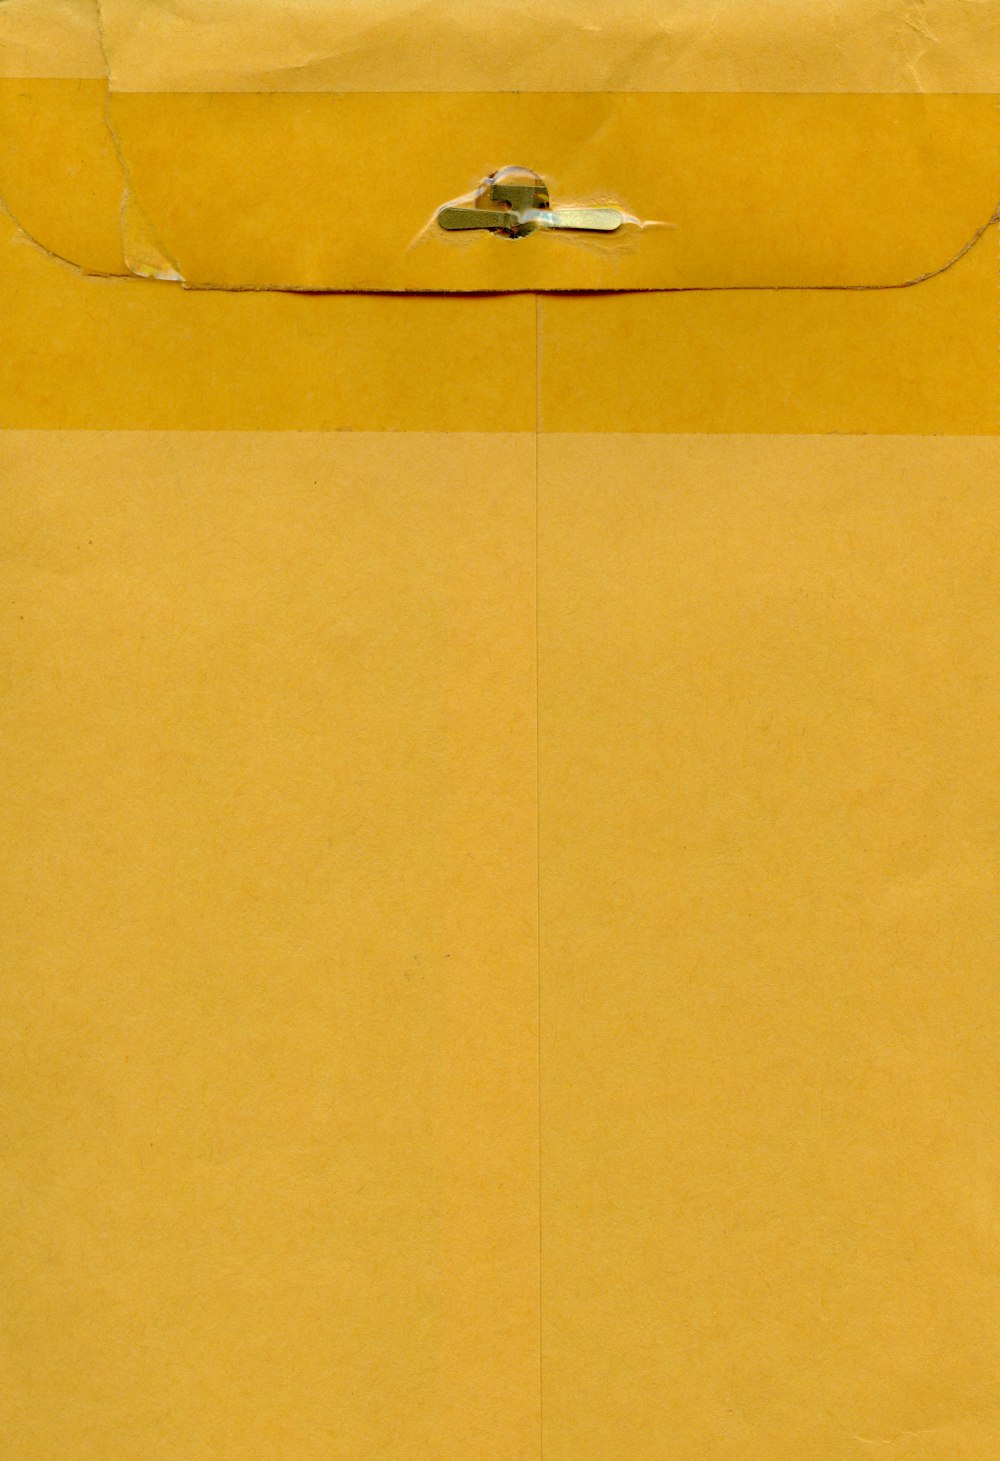 a piece of yellow paper with a bird on it